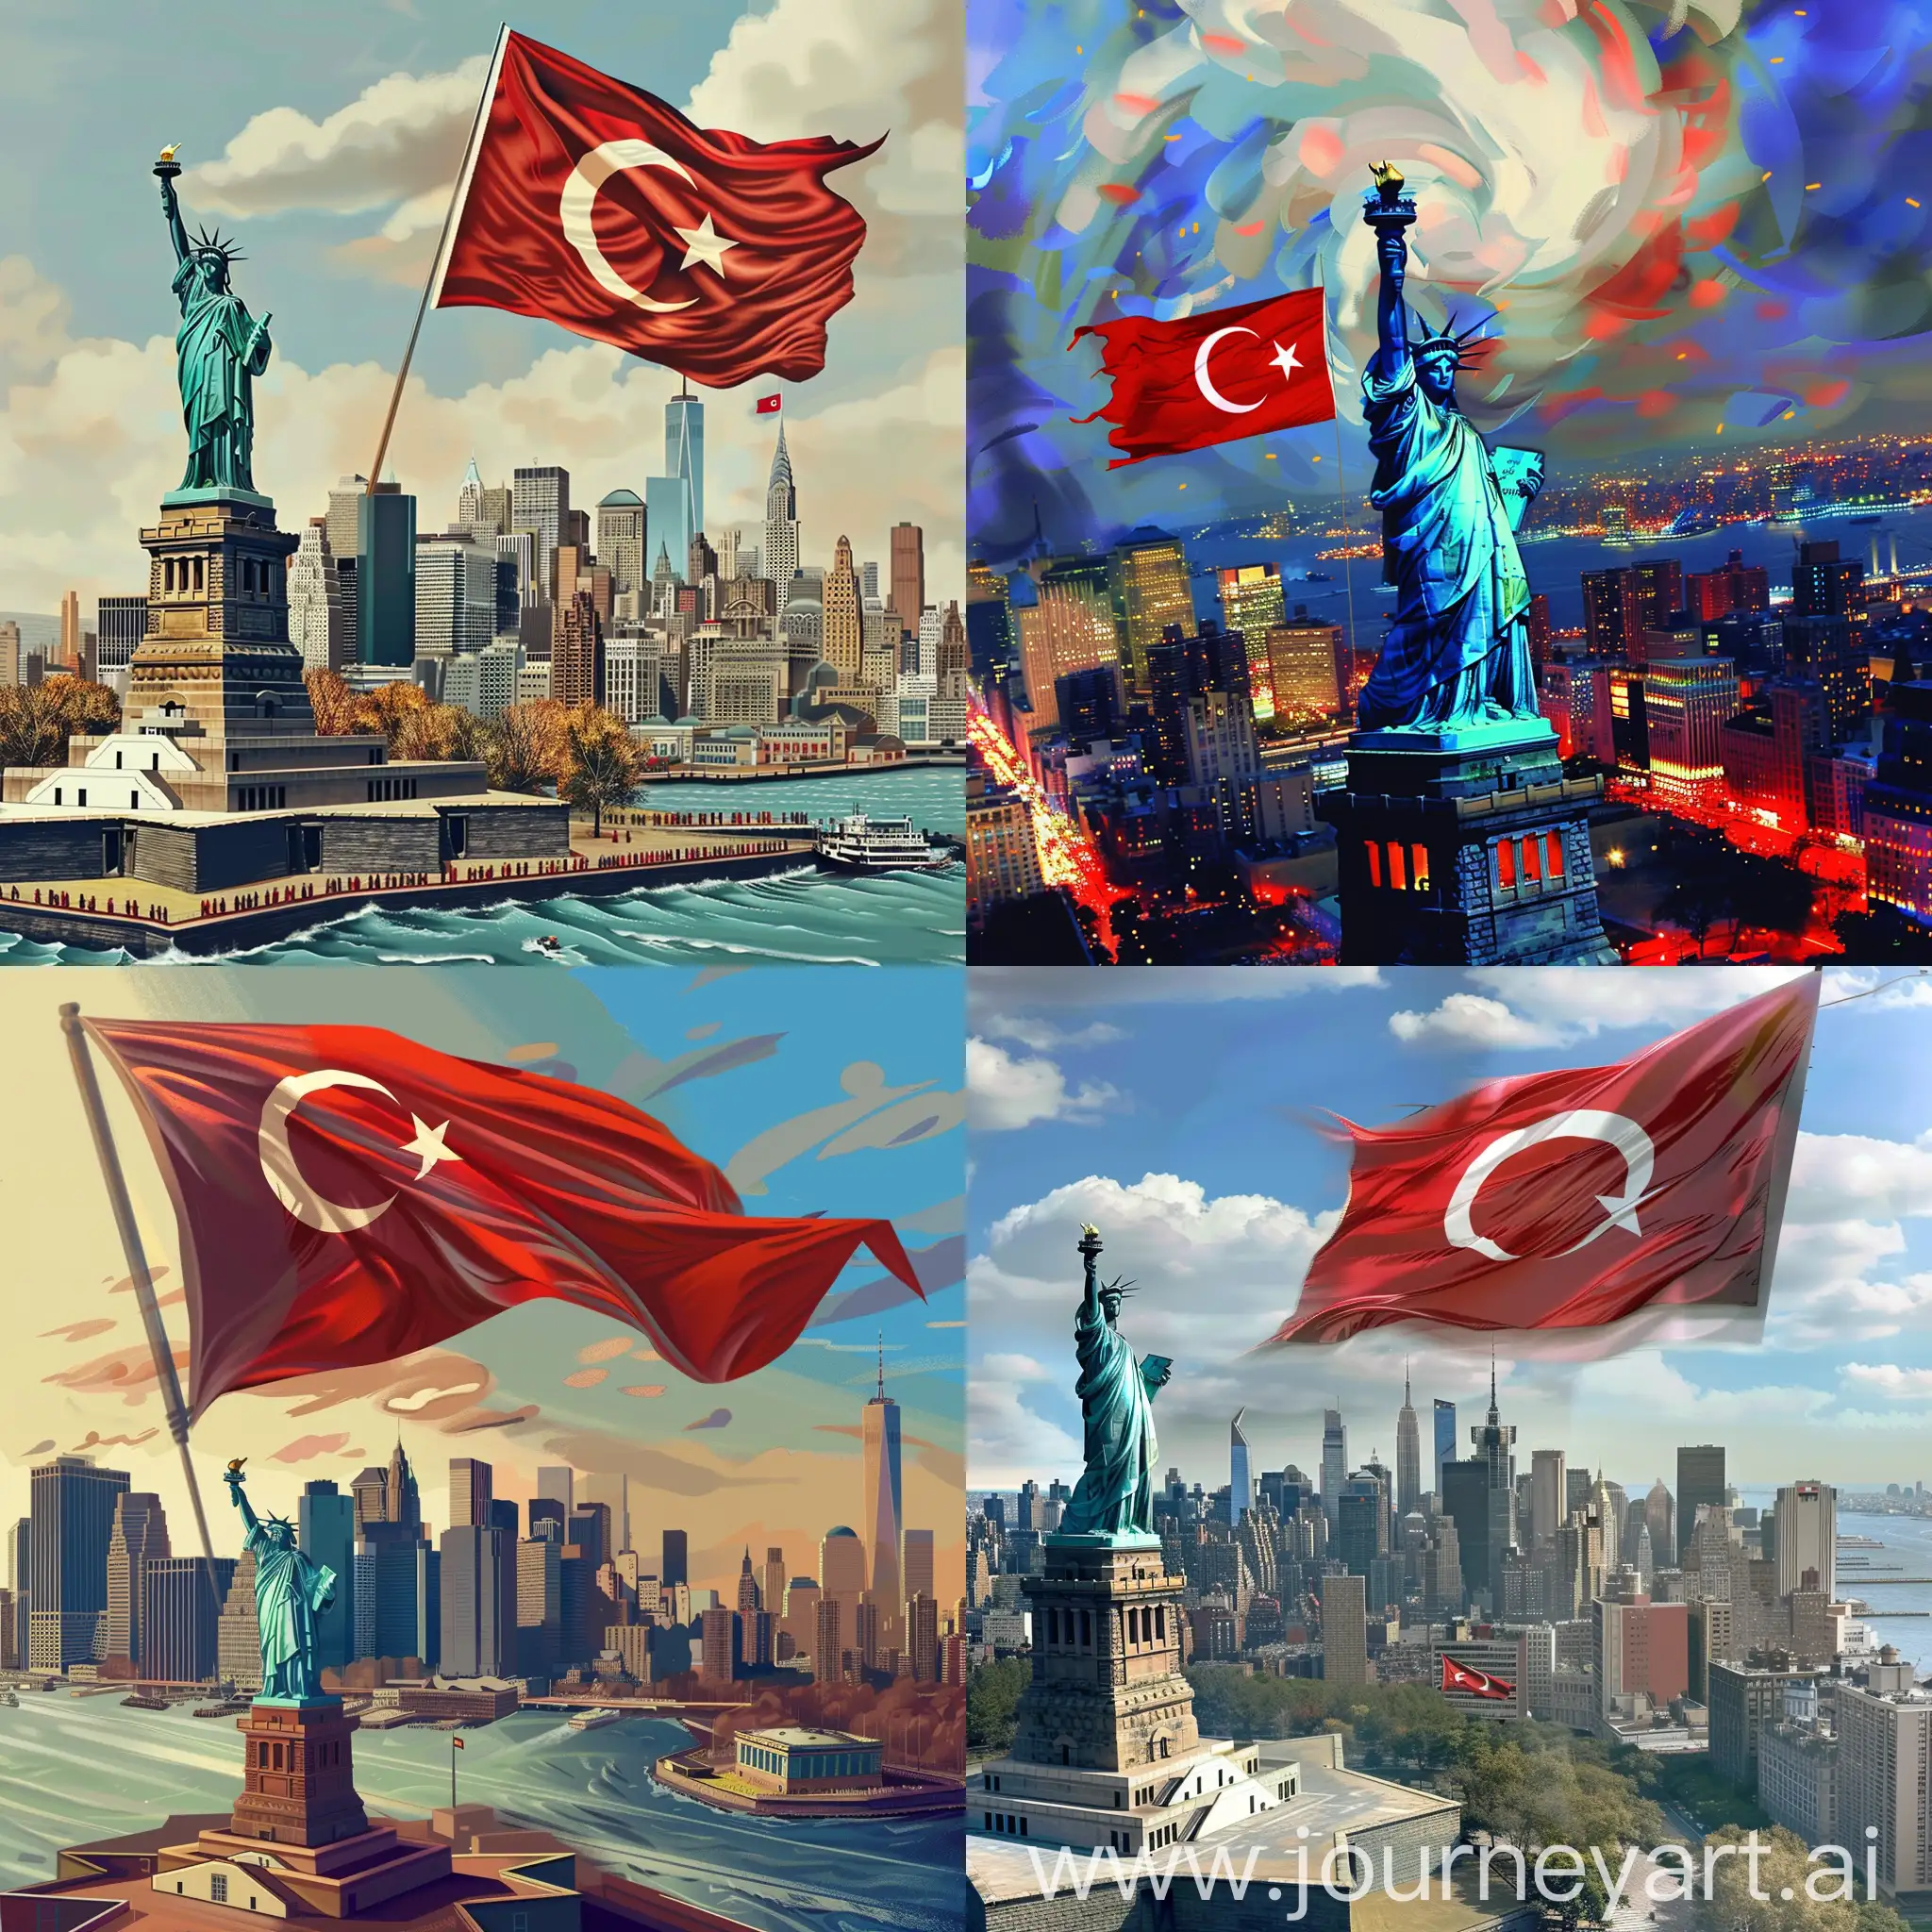 Draw a picture of New York City where Turks are the majority and New York City is in Turkey, with the Turkish flag waving at the Statue of Liberty.
